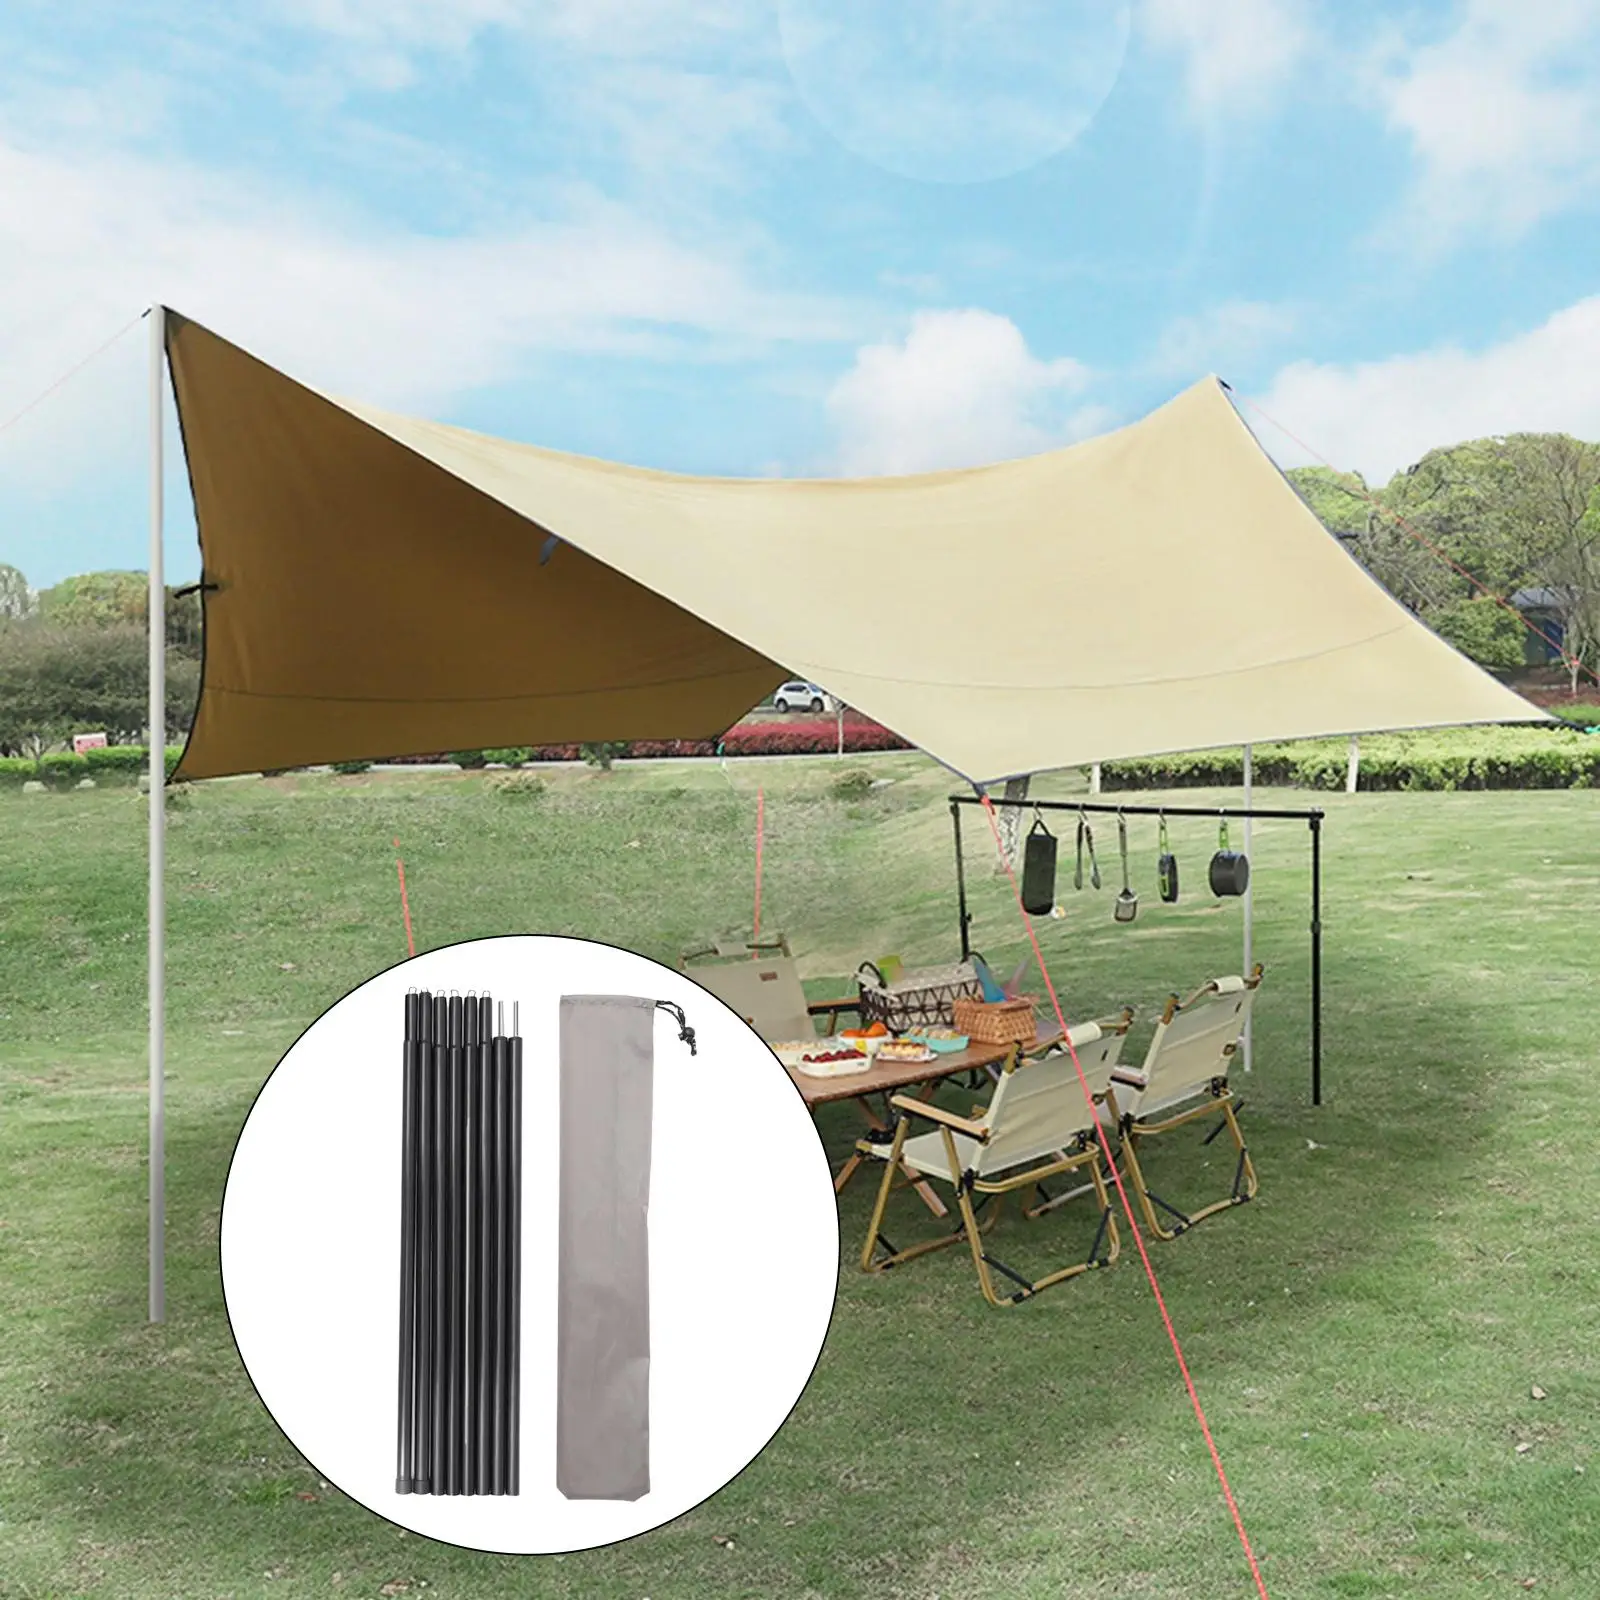 Tent Rods Outdoor Camping Tent Equipment Canopy Tarp Poles Canopy Support Rods Iron Canopy Awning Frame Camping Tent Accessories